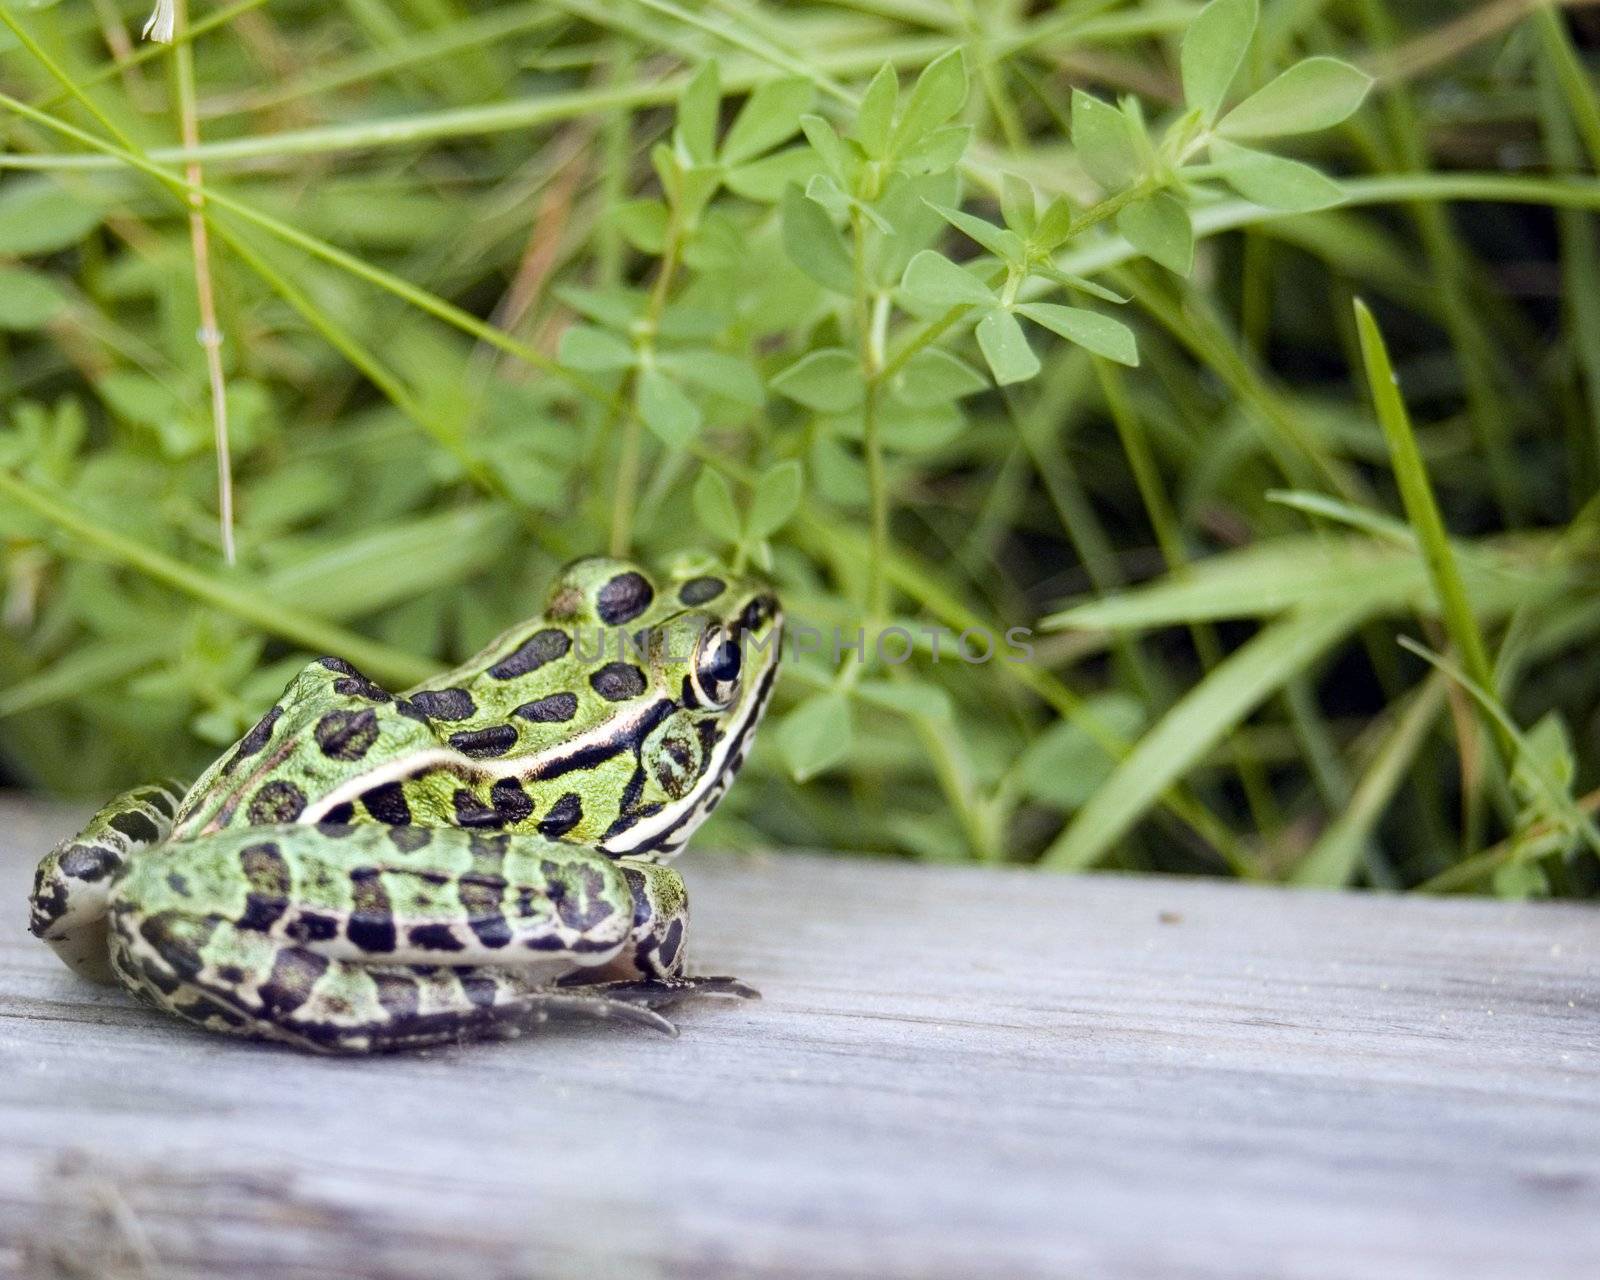 Leopard Frog by brm1949